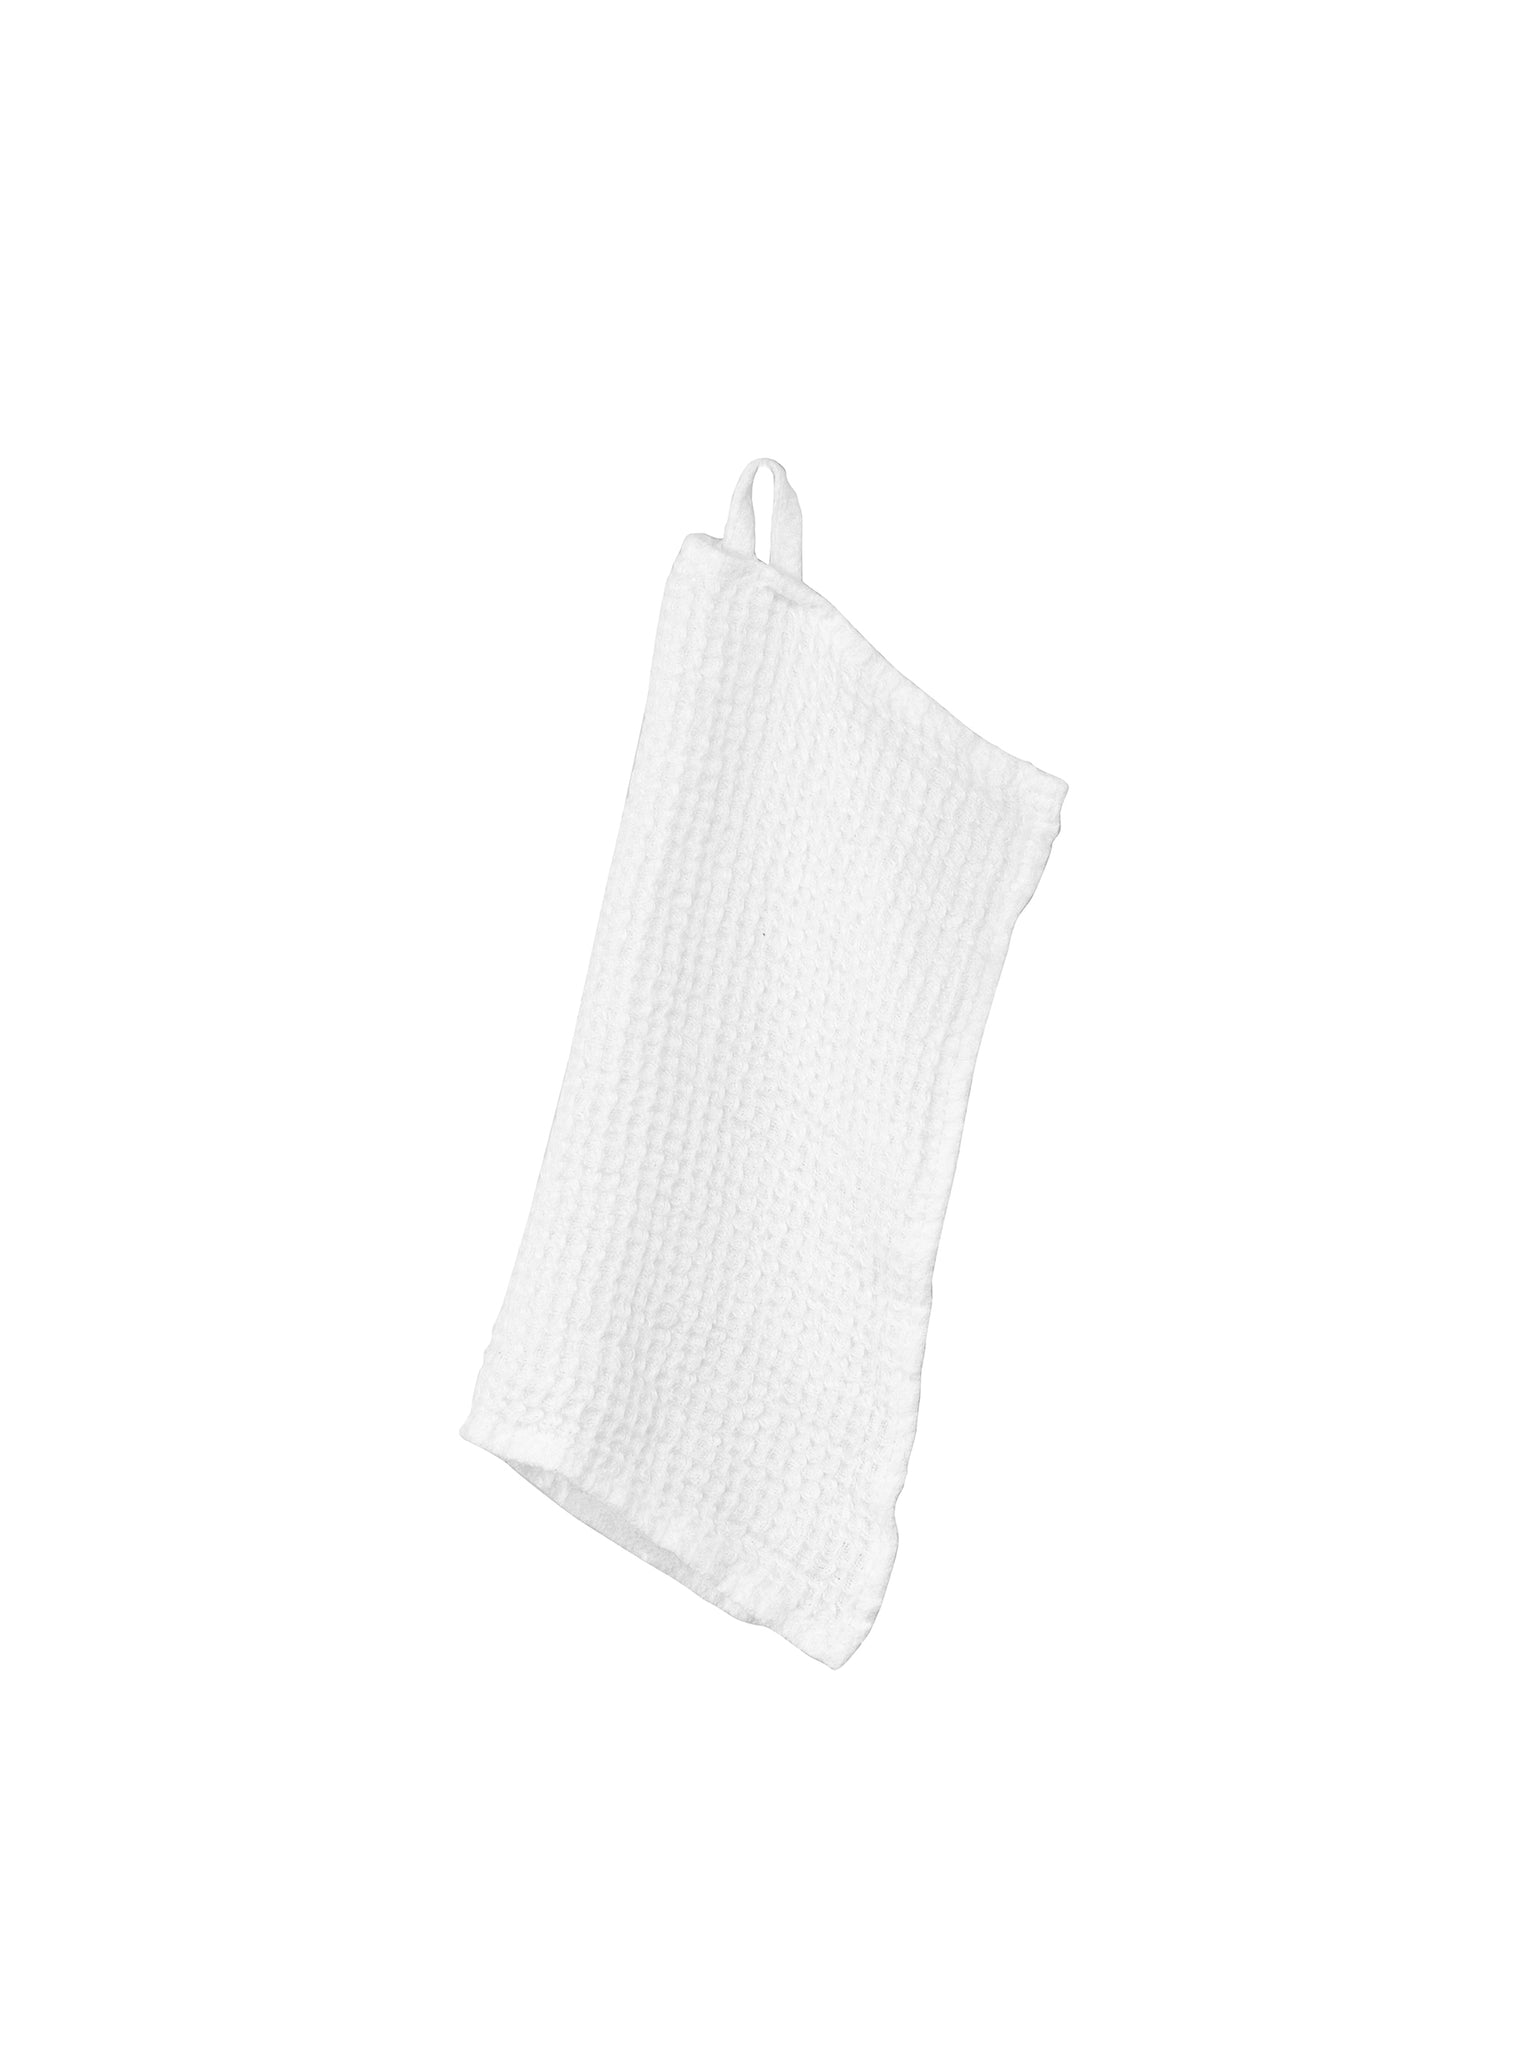 European White Luxury Waffle Weave Towel Collection Wash Cloth Weston Table